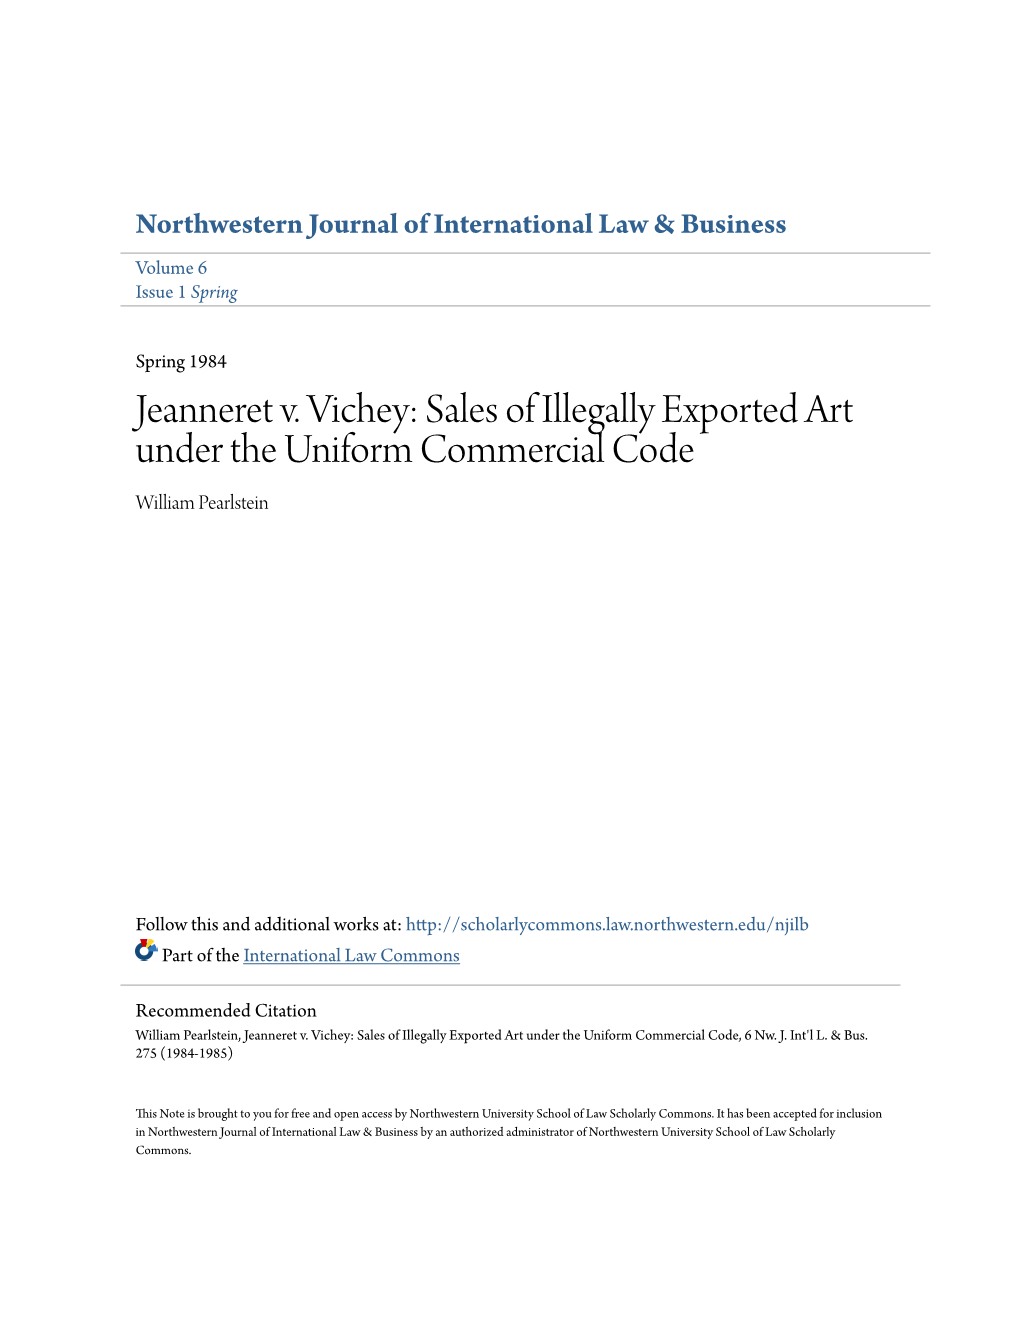 Jeanneret V. Vichey: Sales of Illegally Exported Art Under the Uniform Commercial Code William Pearlstein